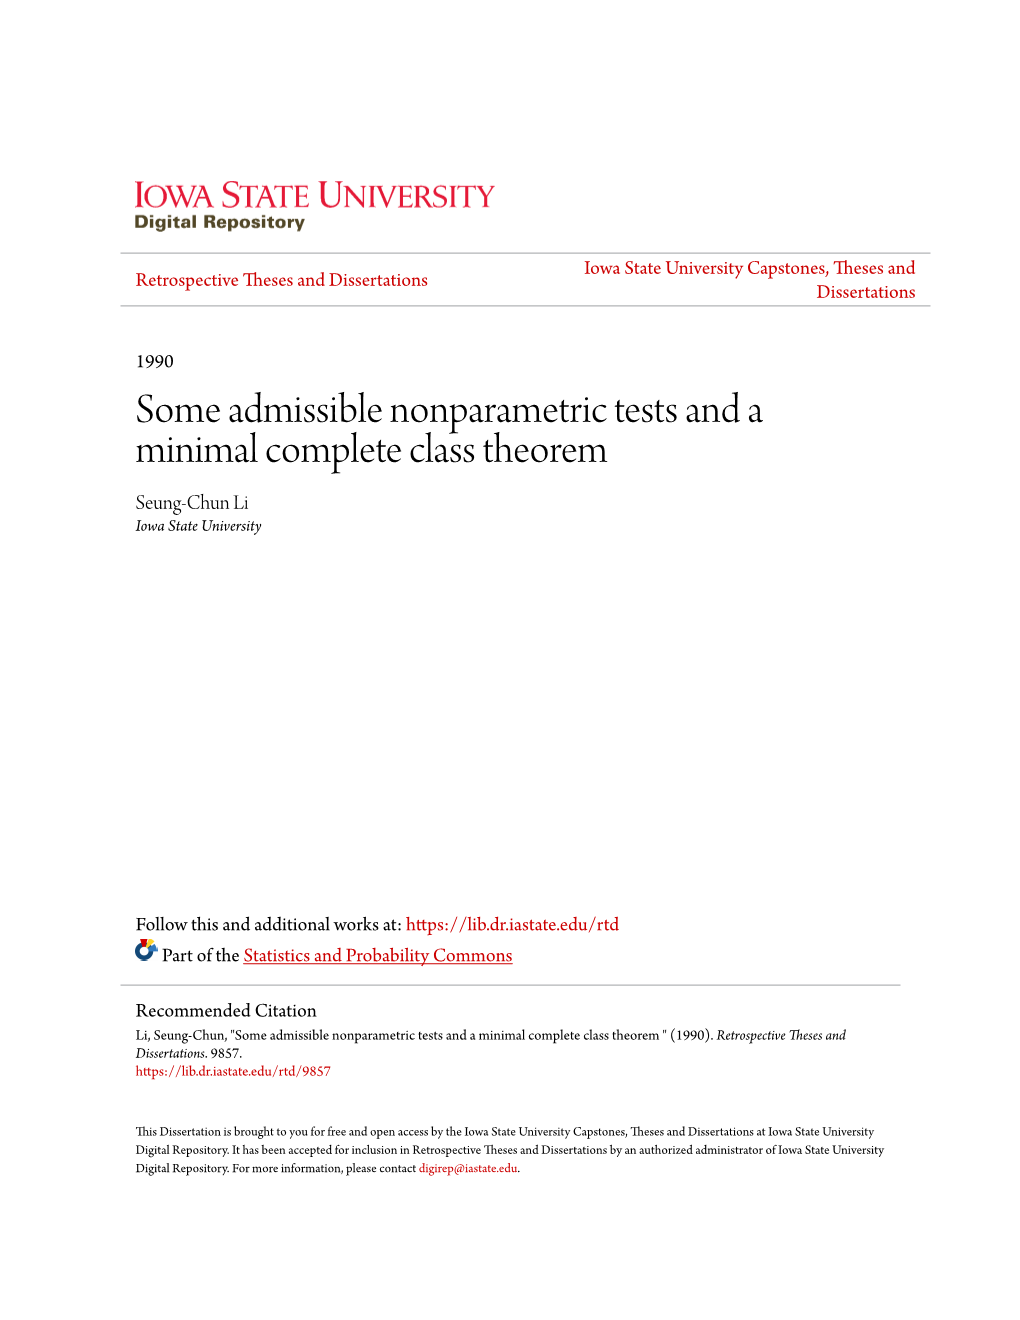 Some Admissible Nonparametric Tests and a Minimal Complete Class Theorem Seung-Chun Li Iowa State University